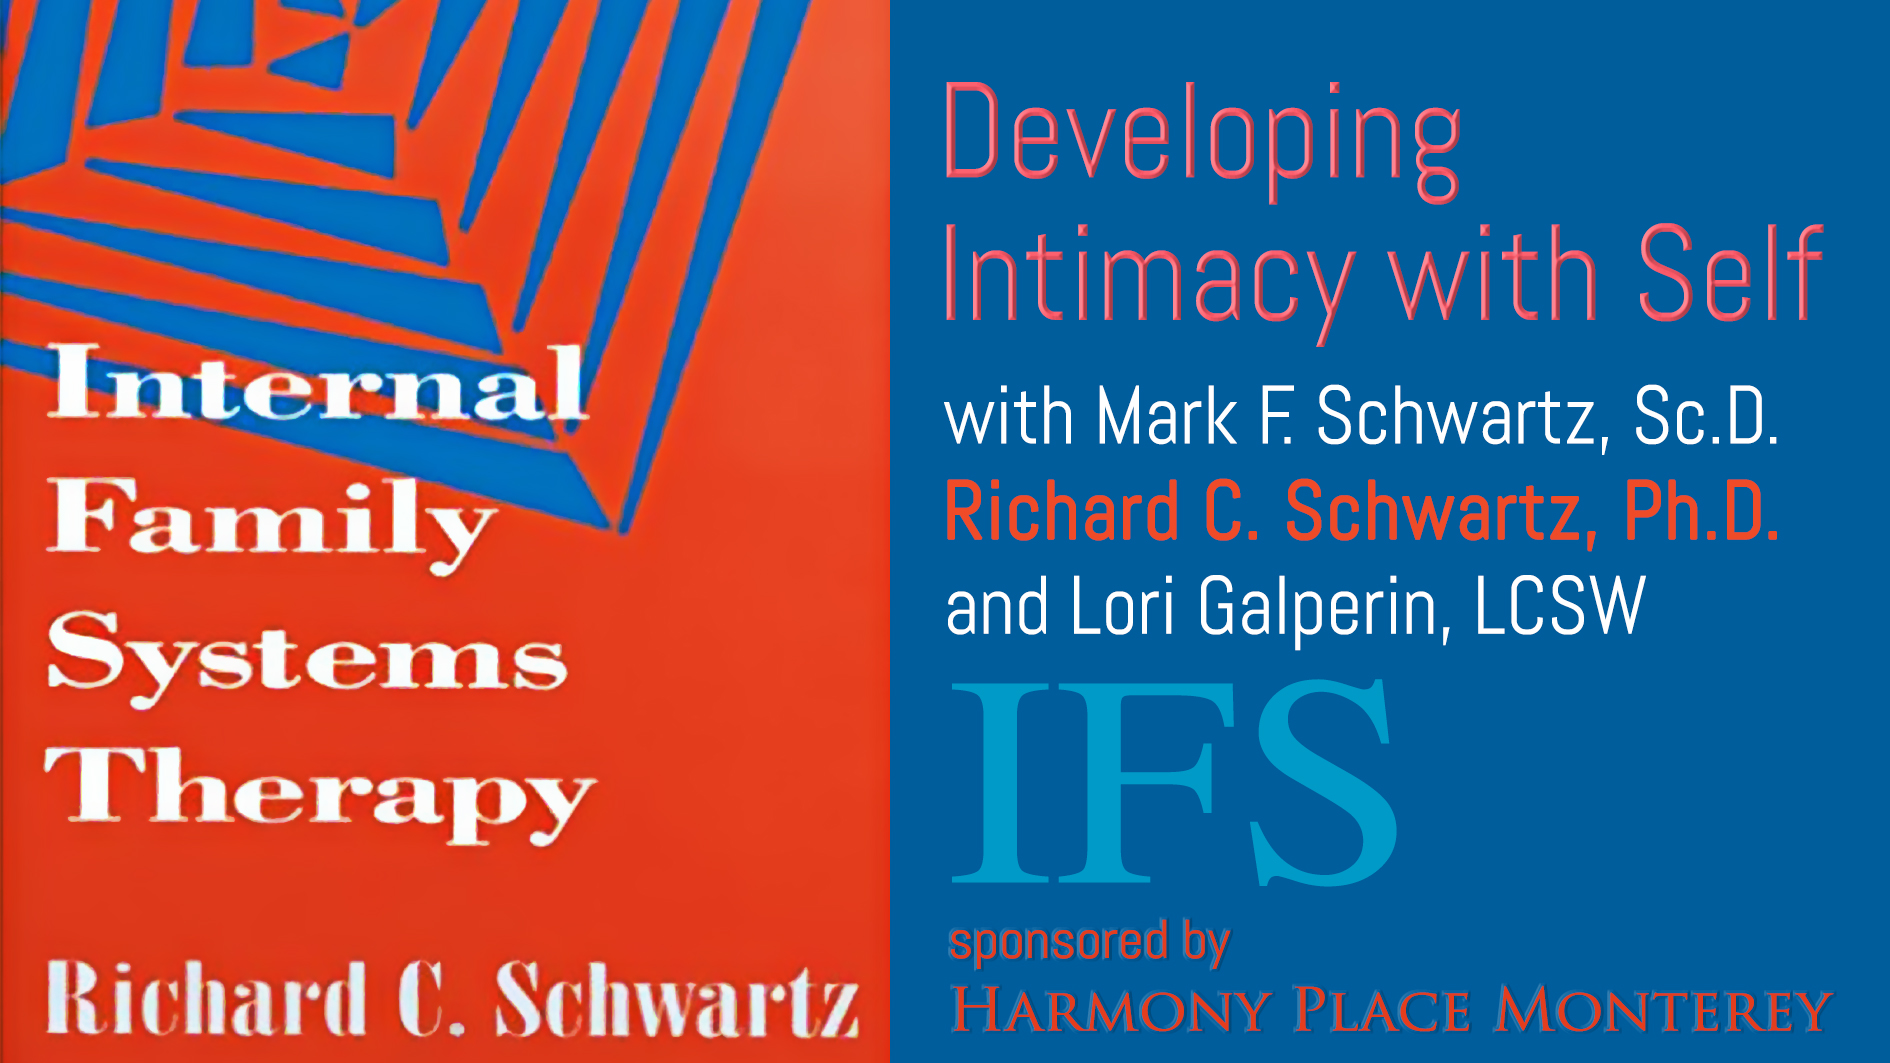 WORKSHOP VIDEO:  “Internal Family Systems | Developing Intimacy with Self”